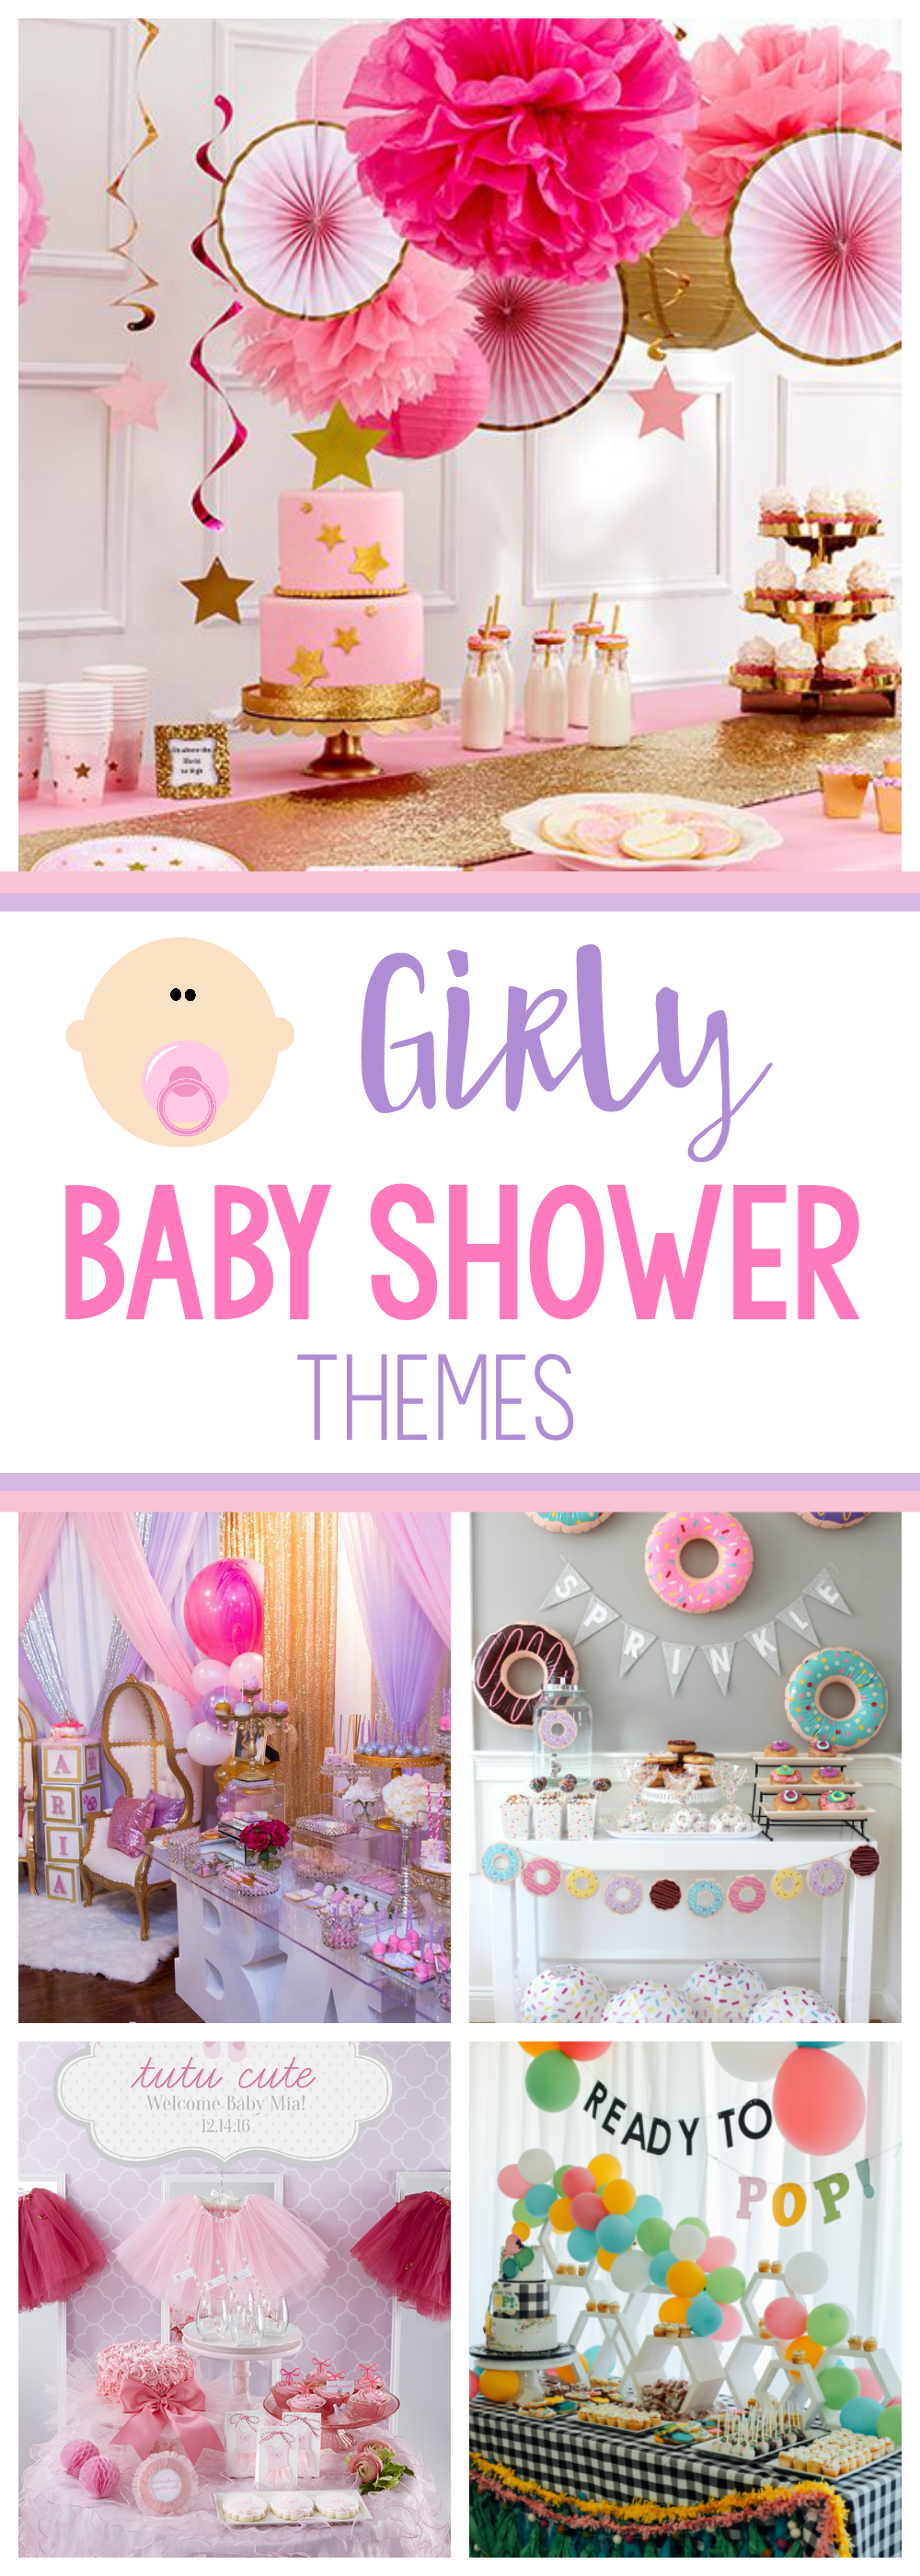 Cute Girl Baby Shower Themes and Ideas-If you're throwing a baby shower and looking for fun baby shower ideas, these themes are full of cute things to do! #babyshower #babyshowerideas #babyshowerthemes